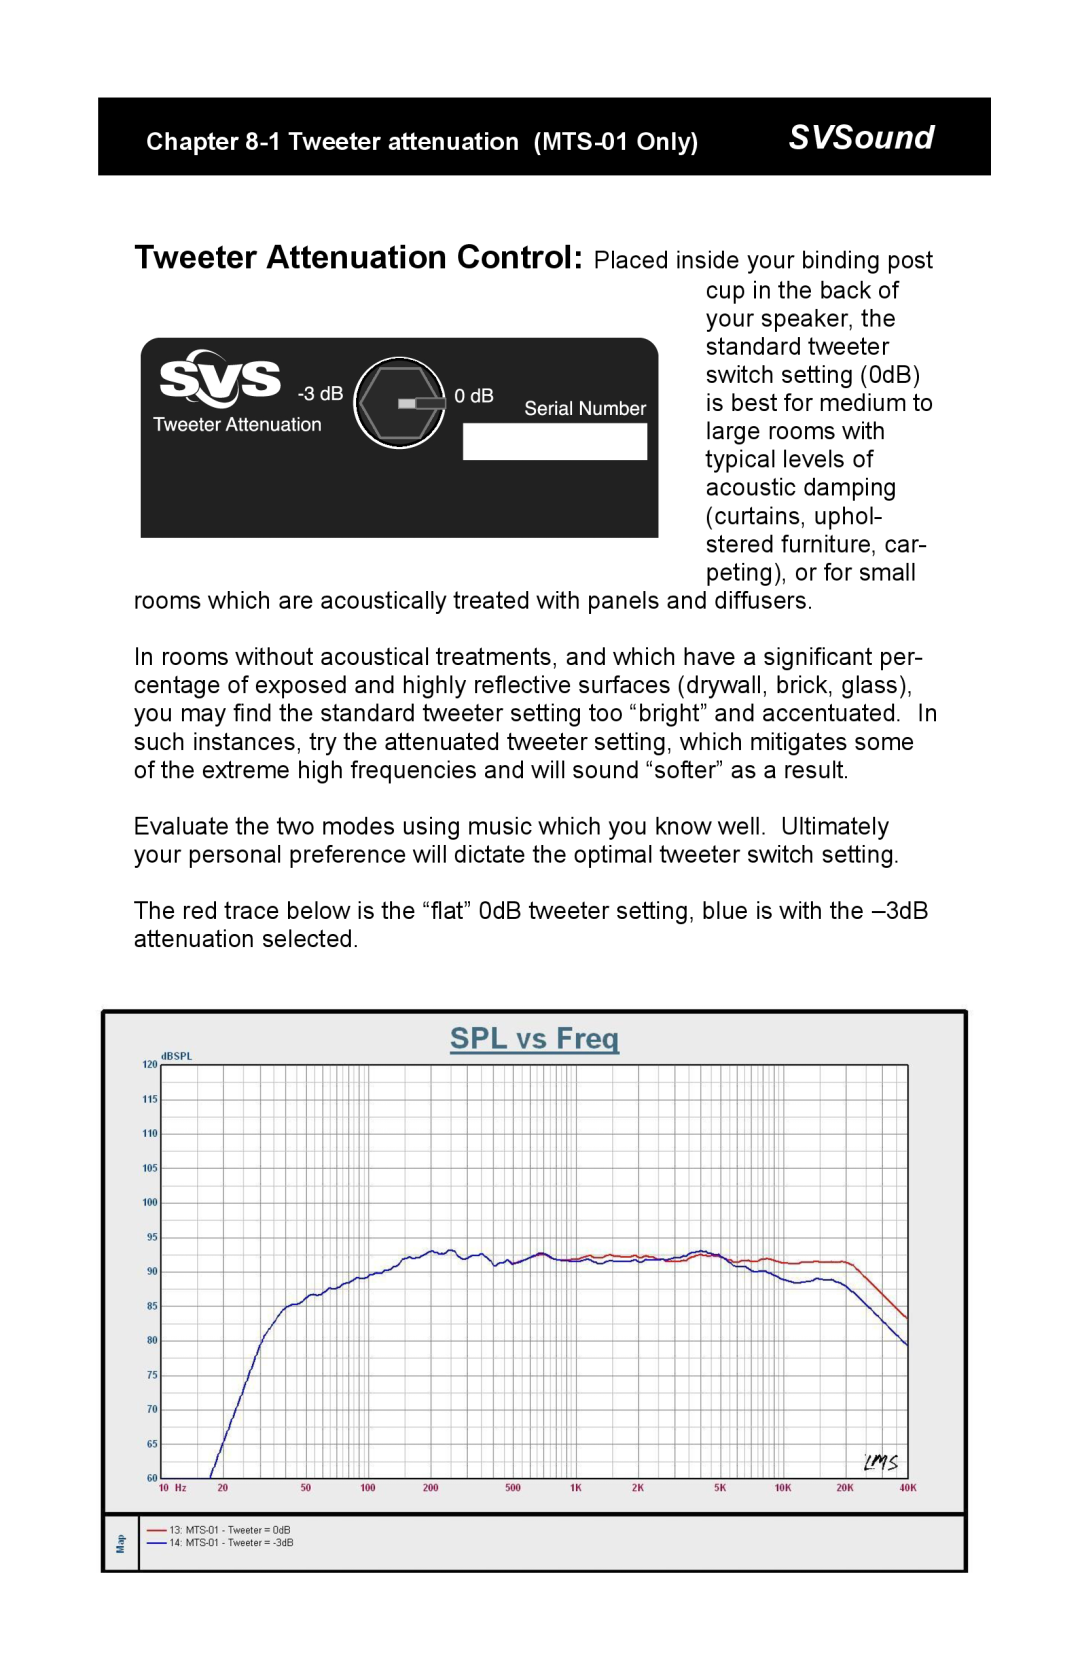 SV Sound SBS-01, SCS-01 specifications SVSound, 1Tweeter attenuation MTS-01Only 